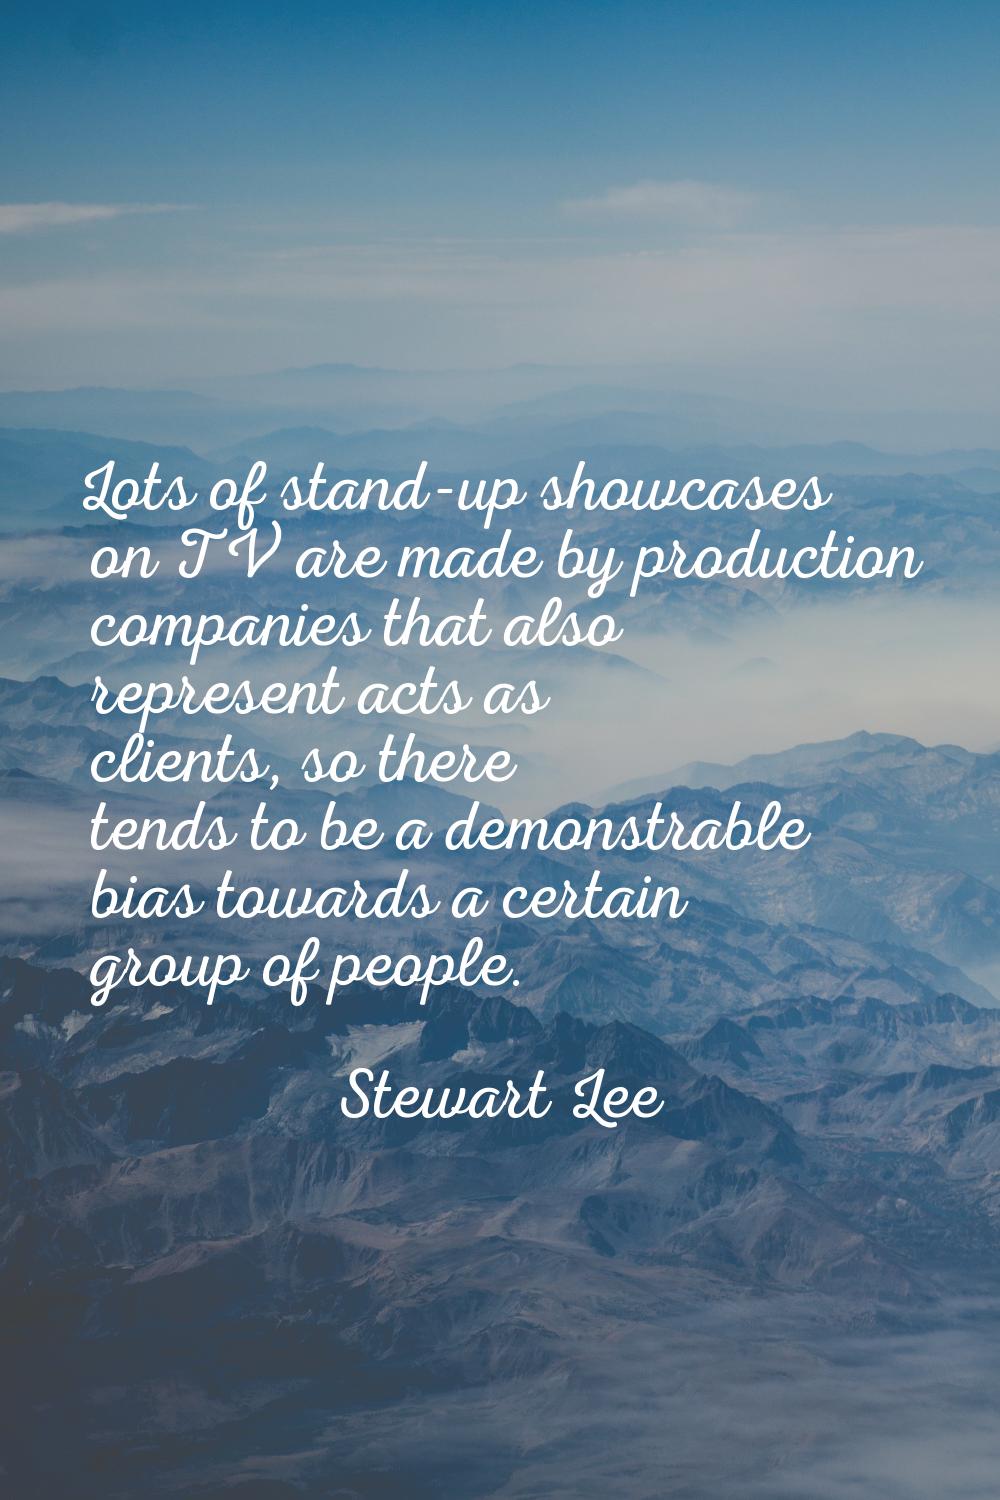 Lots of stand-up showcases on TV are made by production companies that also represent acts as clien